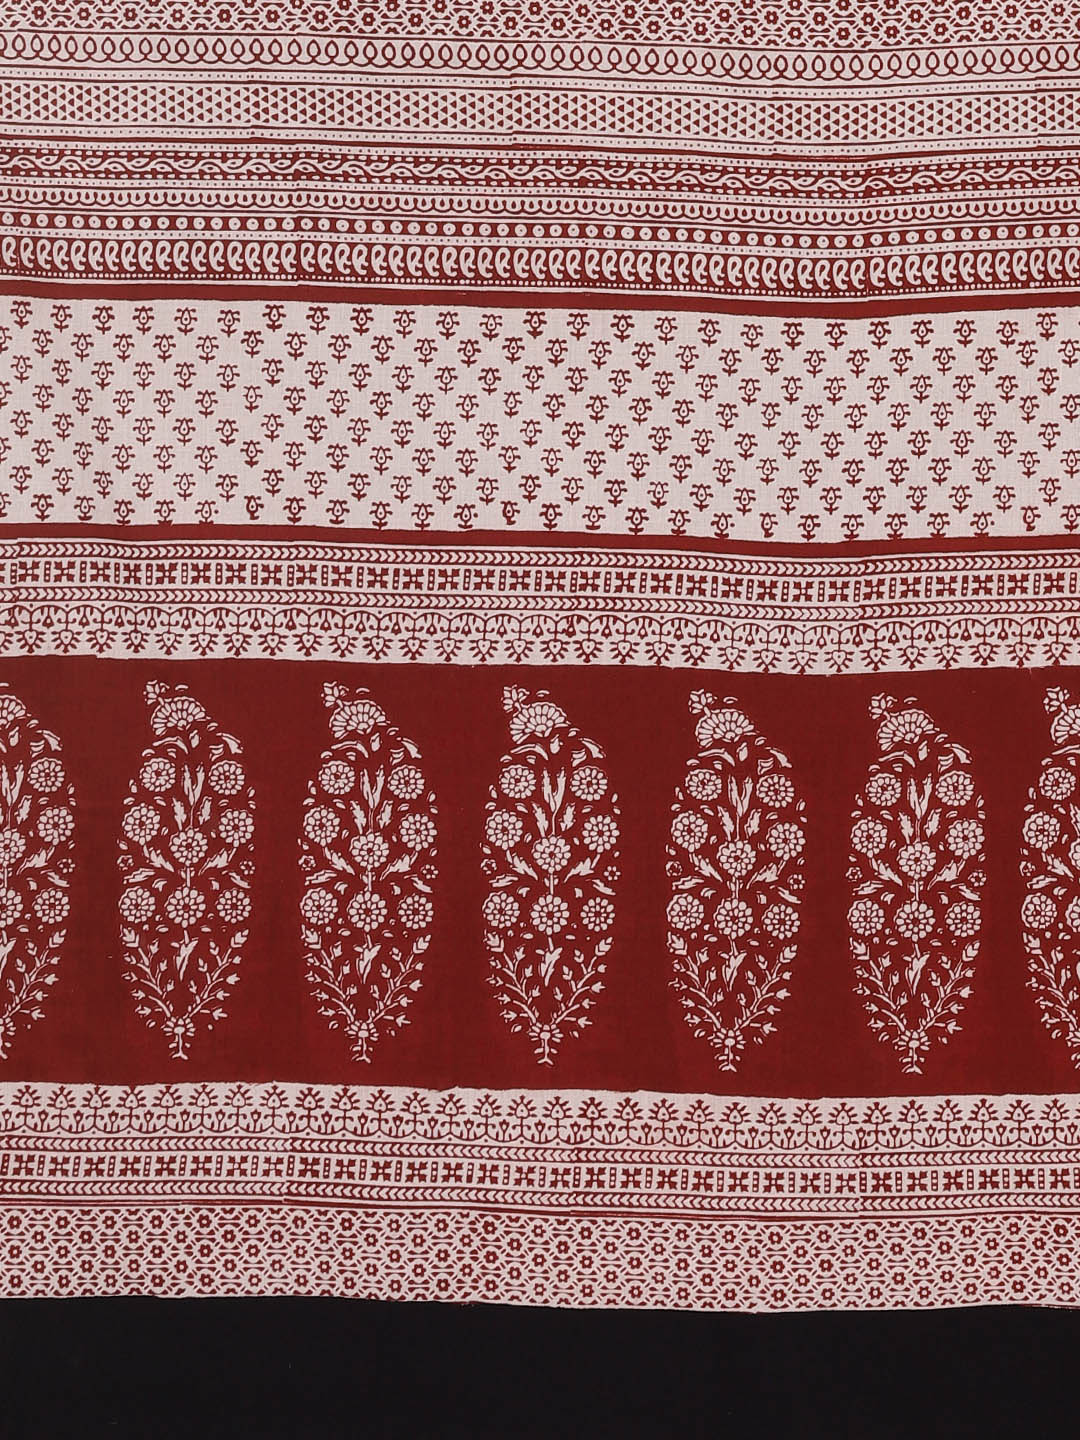 White and Maroon, Kalakari India Beige & Black Printed Bagh Saree ZIBASA0102-Saree-Kalakari India-ZIBASA0102-Bagh, Cotton, Geographical Indication, Hand Crafted, Heritage Prints, Natural Dyes, Red, Sarees, Sustainable Fabrics, Woven, Yellow-[Linen,Ethnic,wear,Fashionista,Handloom,Handicraft,Indigo,blockprint,block,print,Cotton,Chanderi,Blue, latest,classy,party,bollywood,trendy,summer,style,traditional,formal,elegant,unique,style,hand,block,print, dabu,booti,gift,present,glamorous,affordable,col